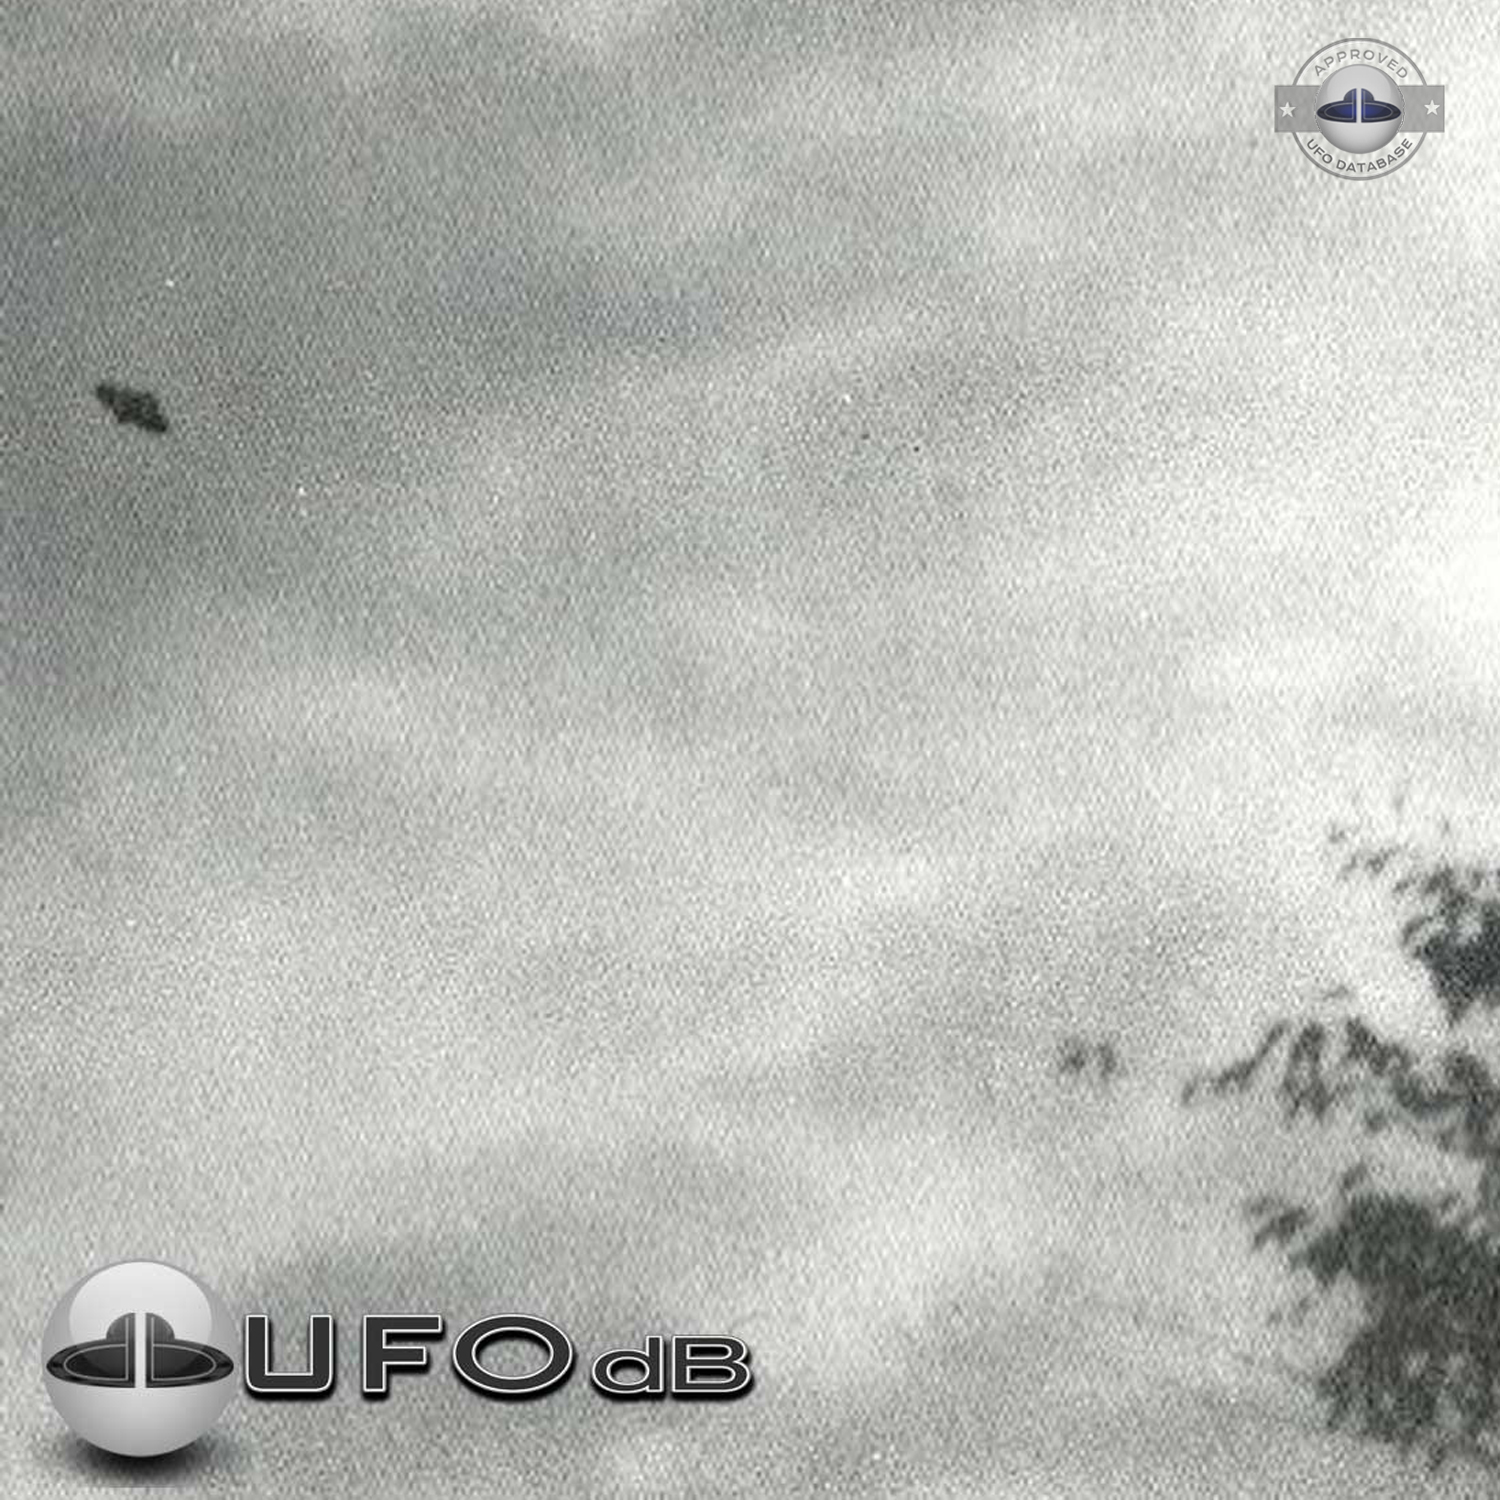 UFO over Sapporo, Hokkaido - we can see a statue of the virgin Mary UFO Picture #69-2